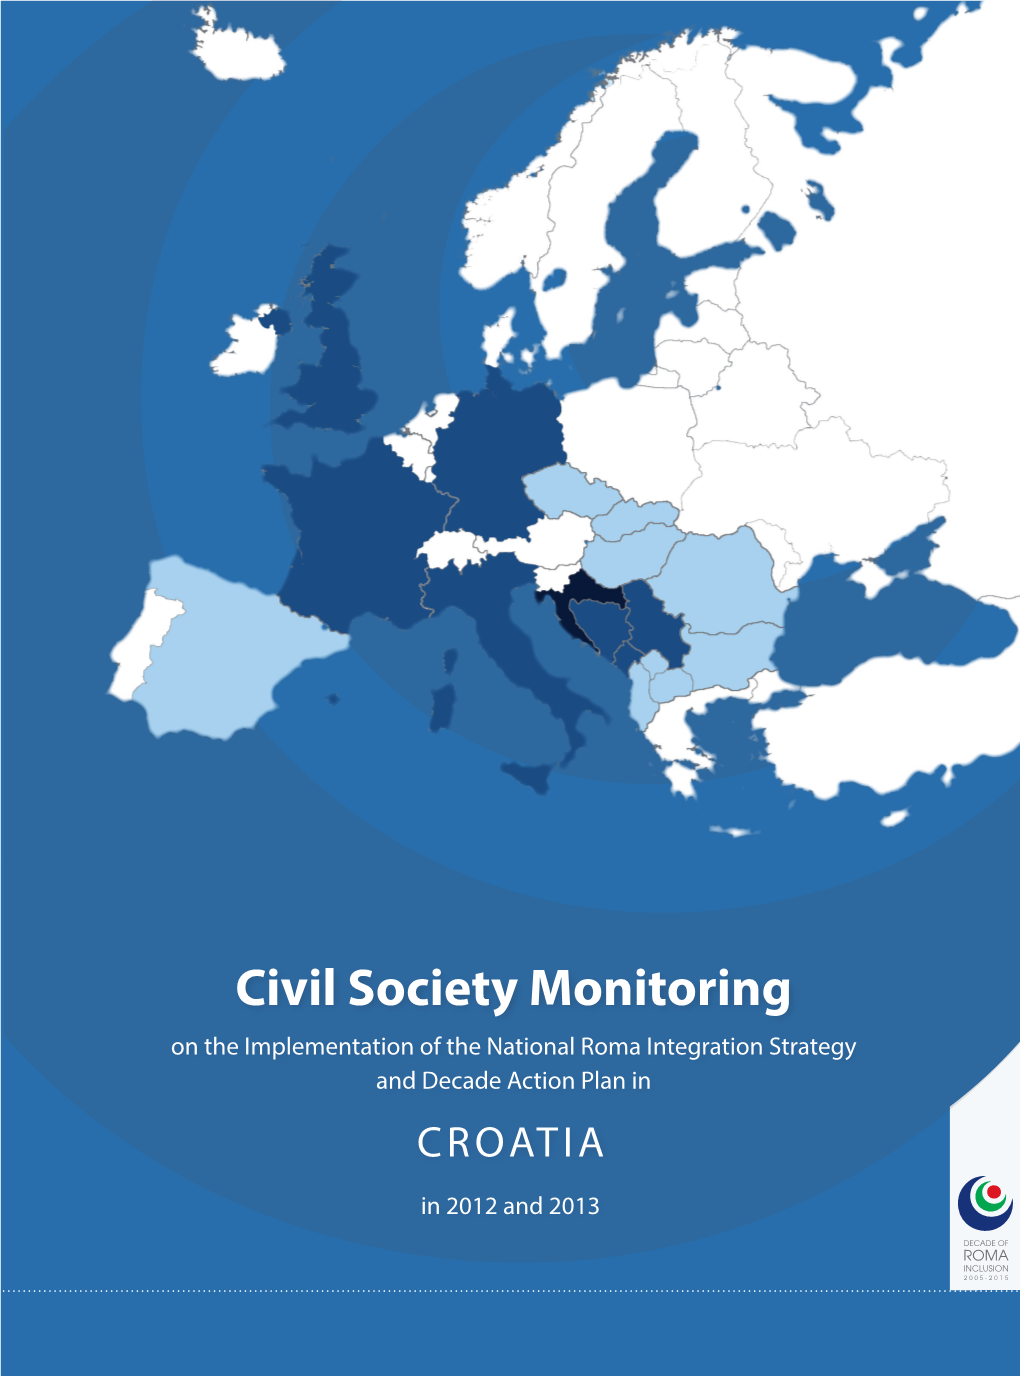 Civil Society Monitoring on the Implementation of the National Roma Integration Strategy and Decade Action Plan in CROATIA